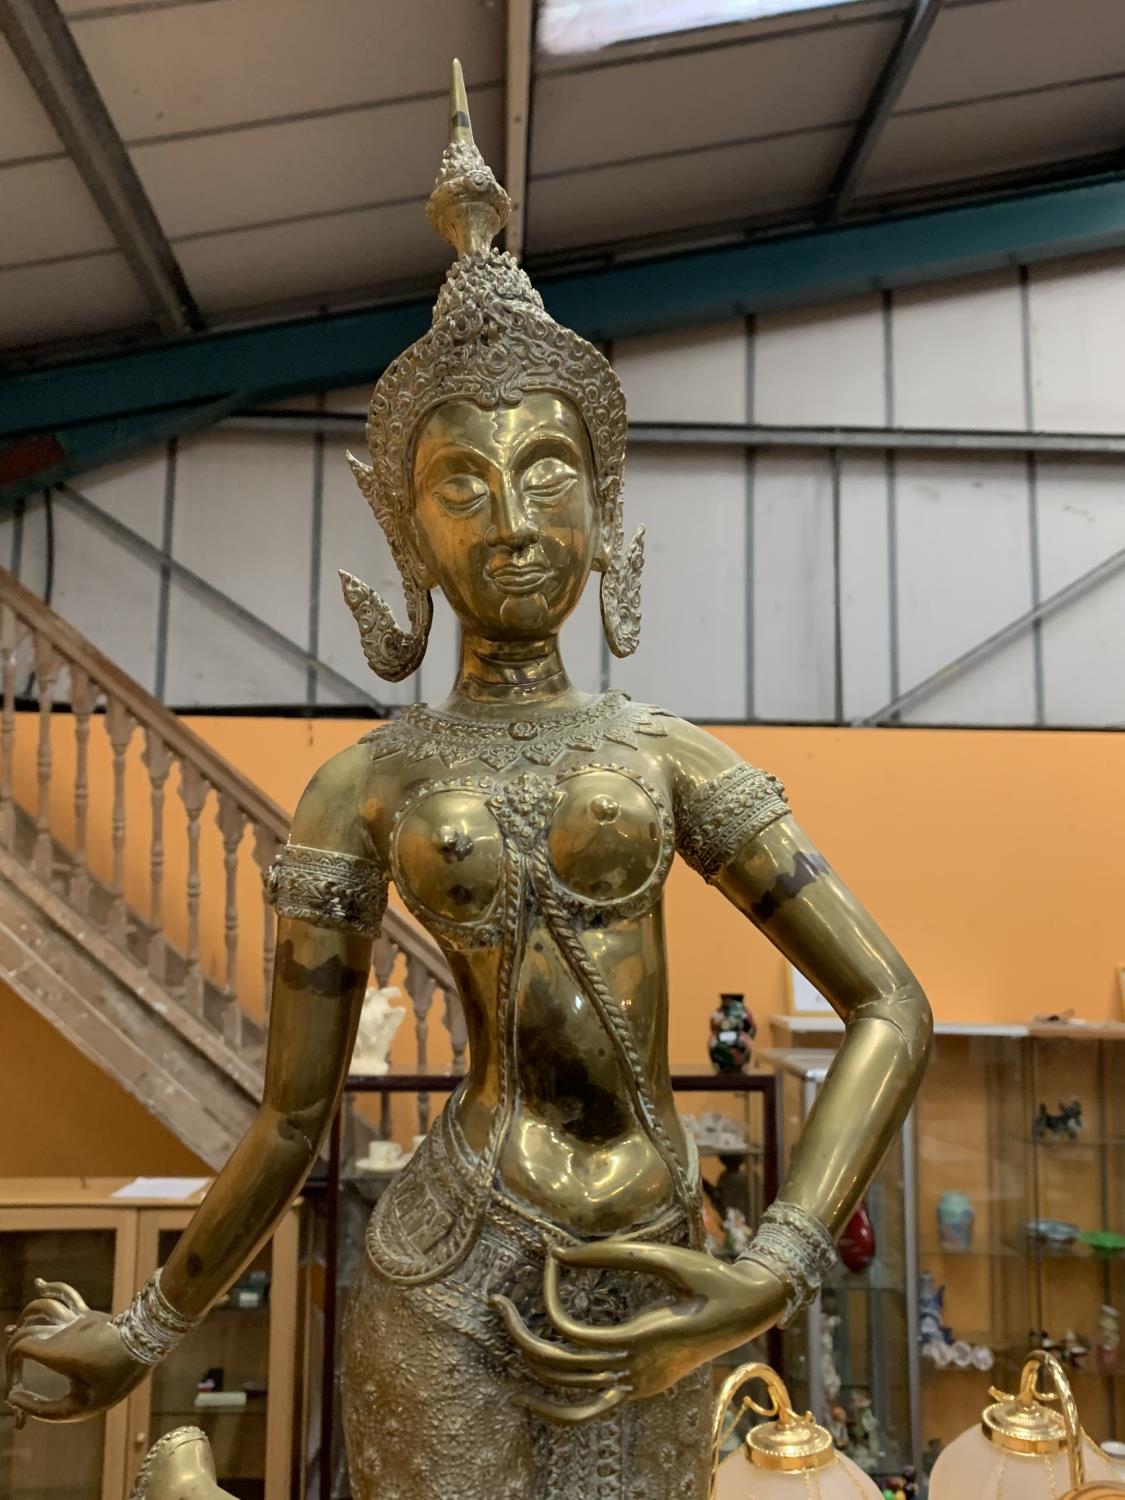 A LARGE BRASS STATUE OF A ORIENTAL TEMPLE DANCER ON A WOODEN PLINTH - HEIGHT 79CMS